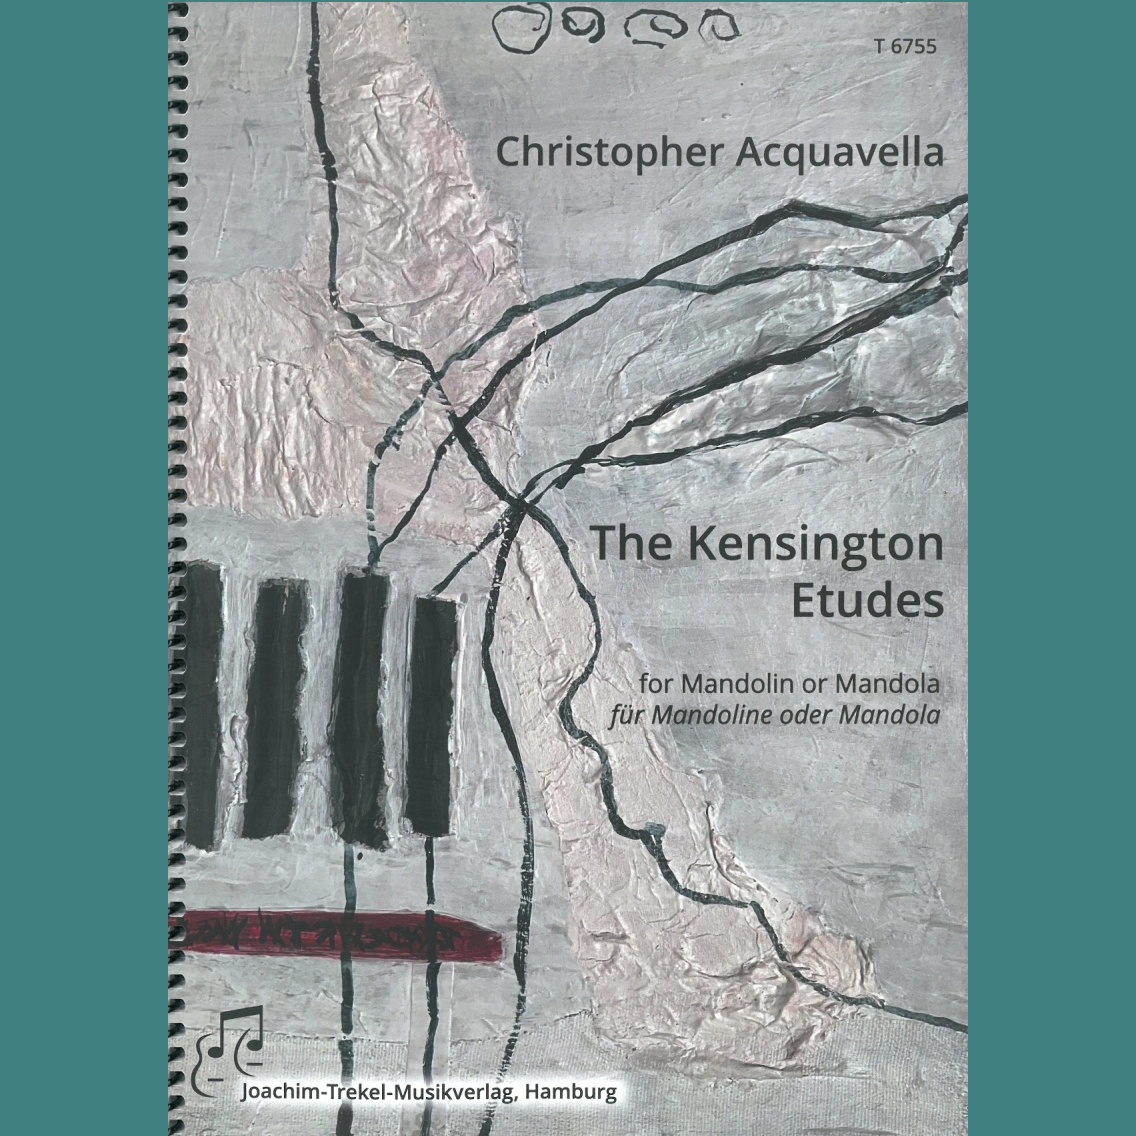 You are currently viewing The Kensington Etudes – Chris Acquavella